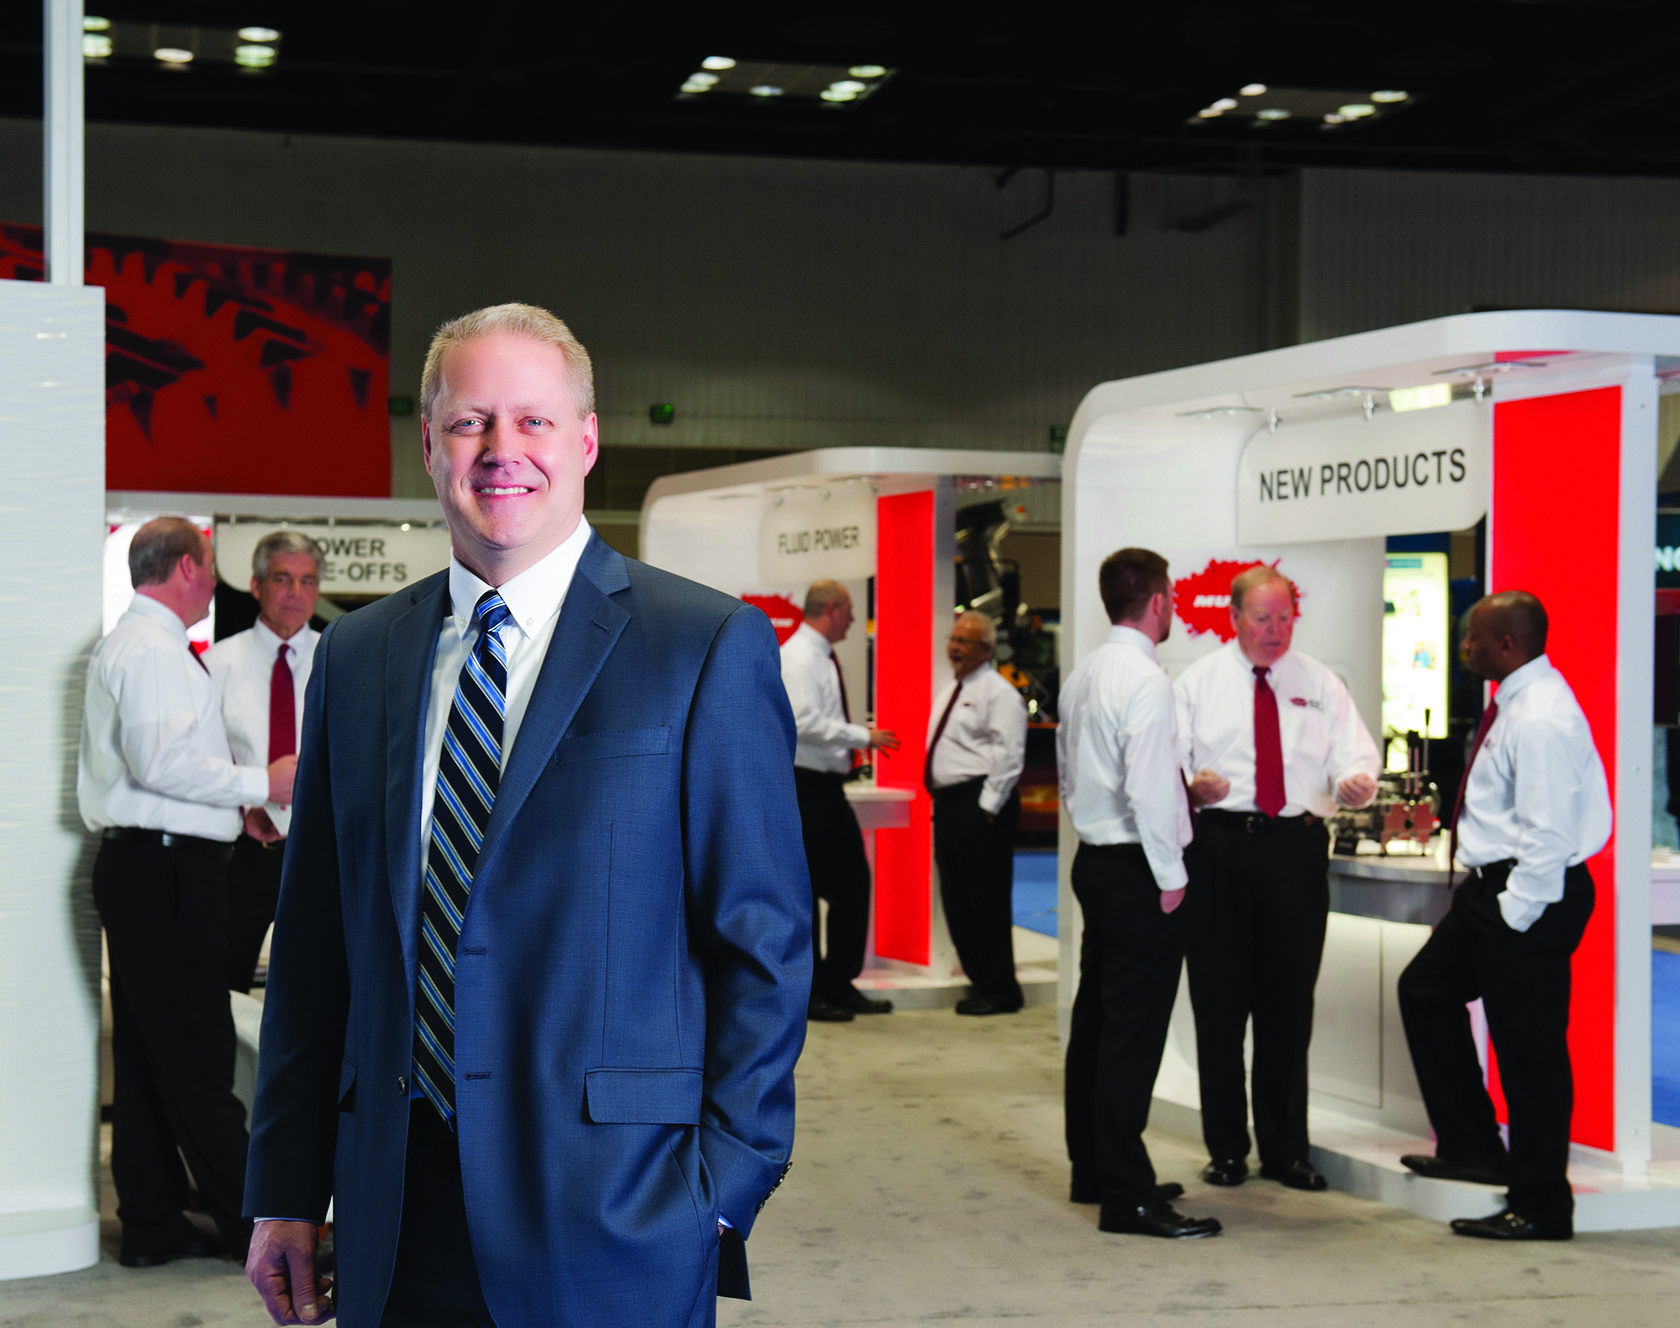 An image of Scott Huntsman at the Muncie Power trade show booth with members of the team behind him.